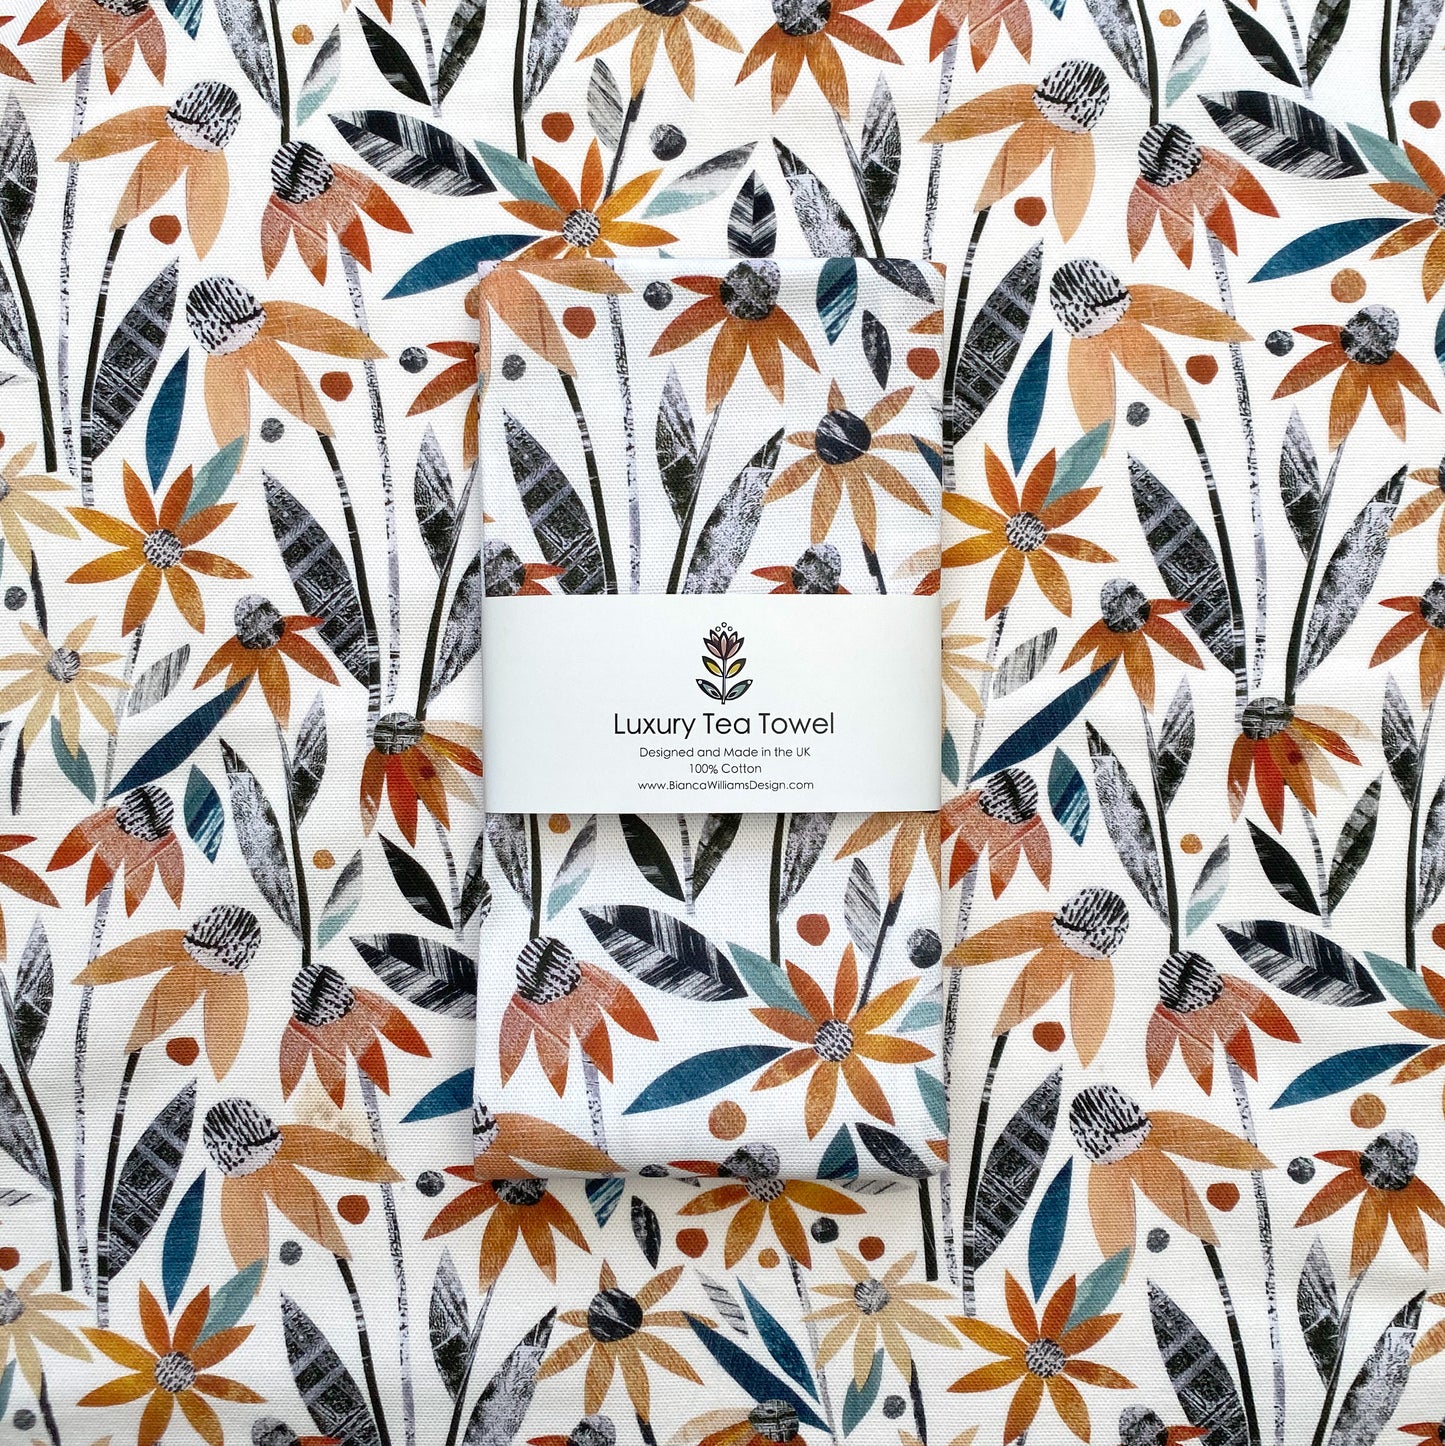 Rudbeckia Cotton Tea Towel, featuring Coneflowers in every shade of orange with Soft Green and Grey Leaves on a white background.  One Rudbeckia Tea Towel is shown in packaging laid onto a laid out Rudbeckia tea Towel.